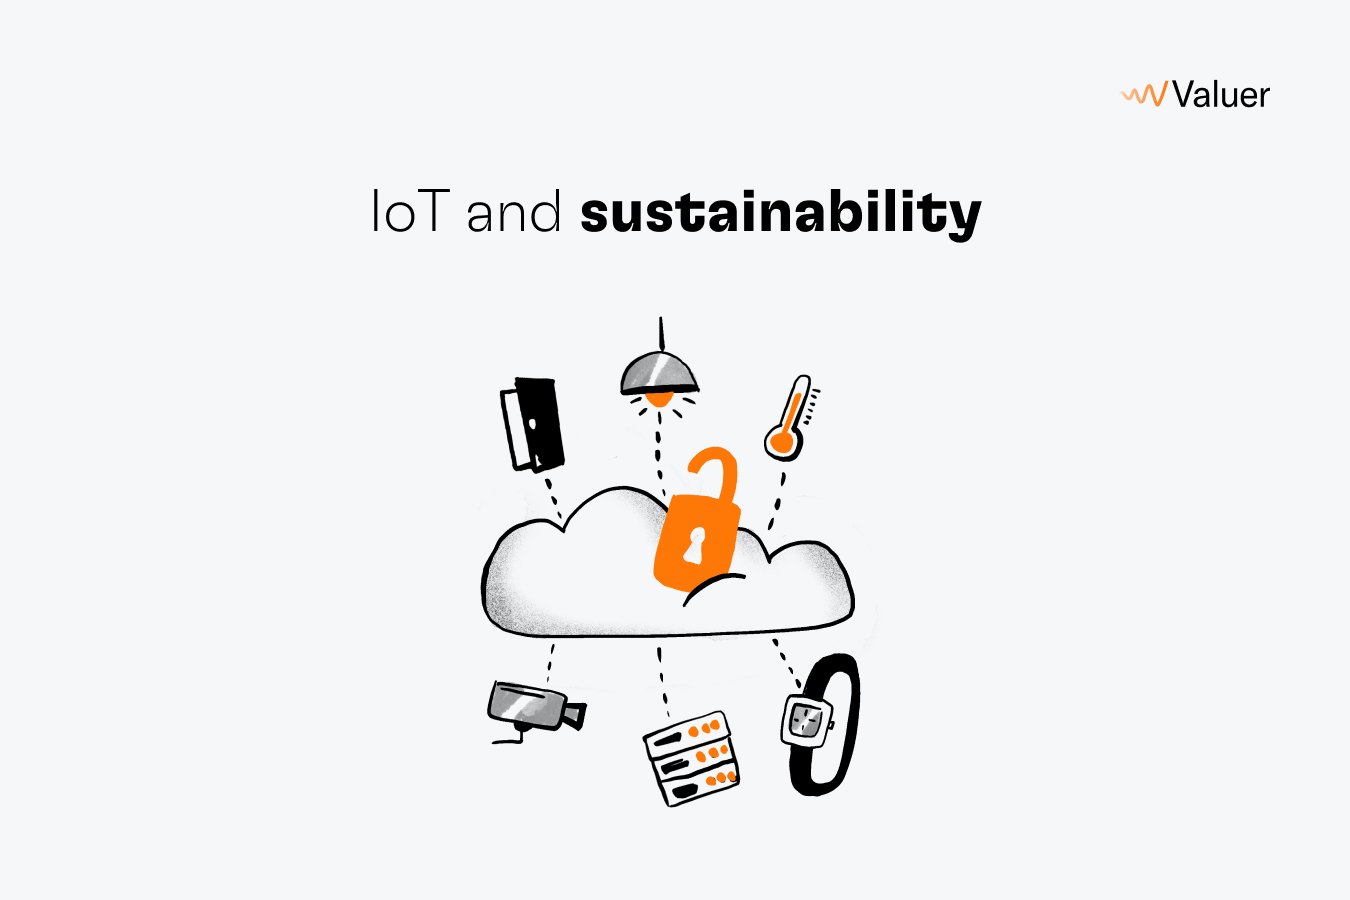 IoT and sustainability